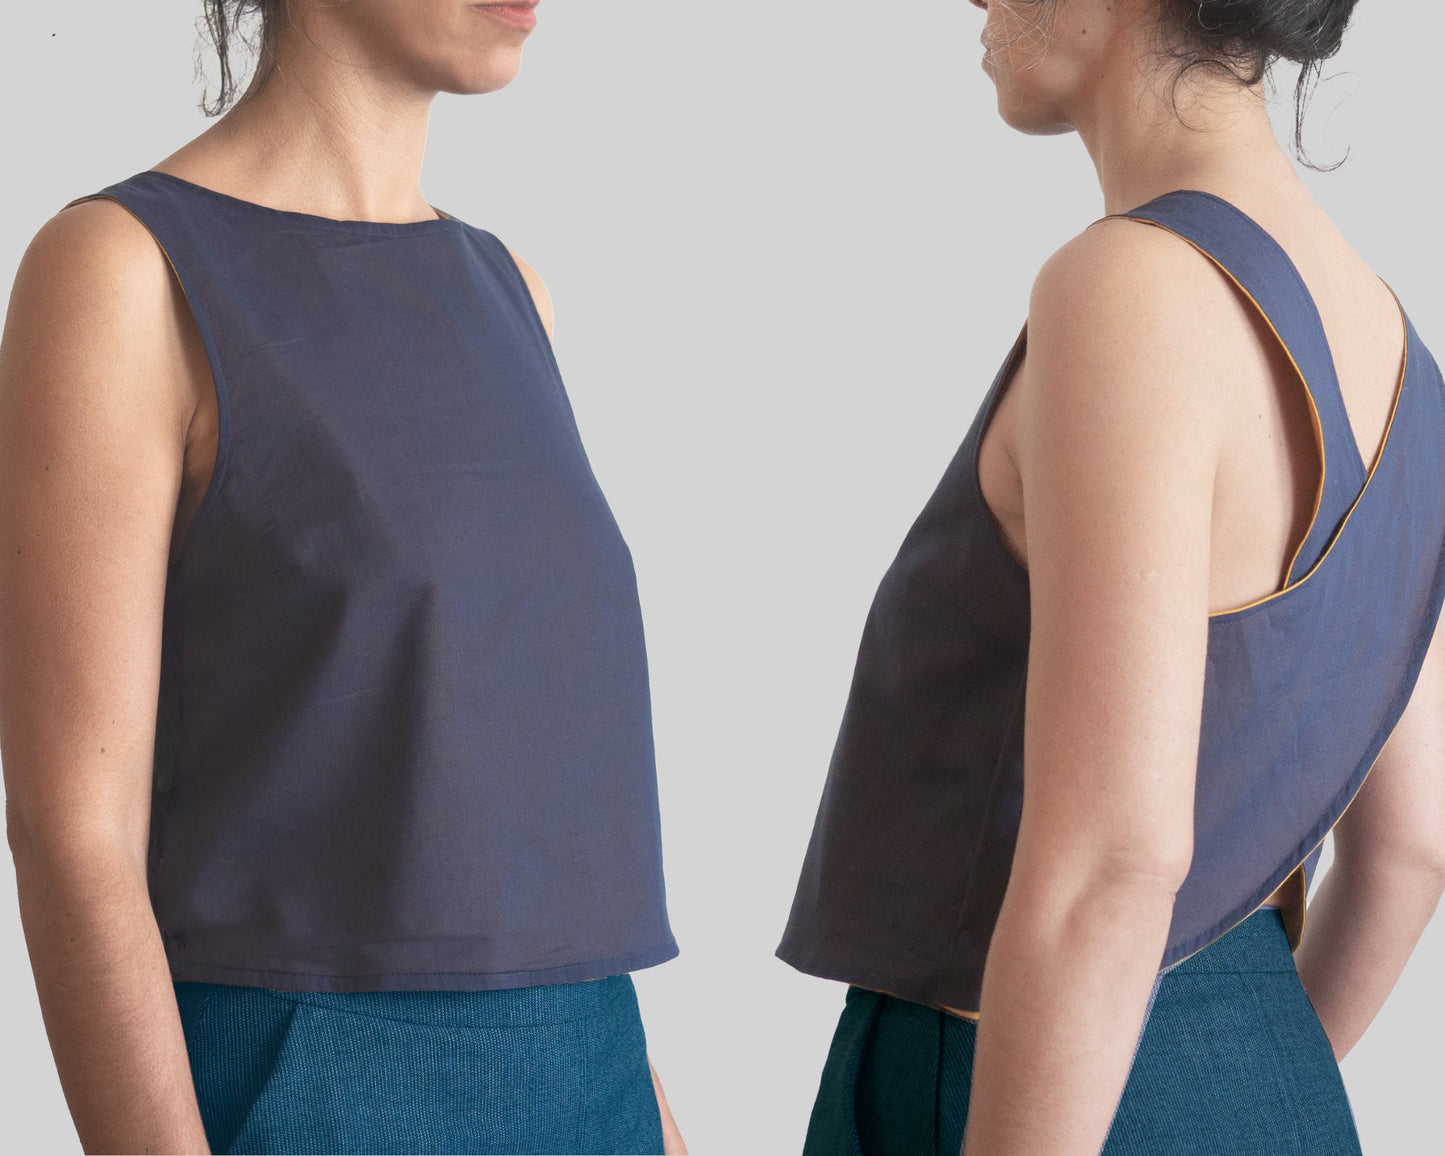 BRIA crossback top - sewing pattern